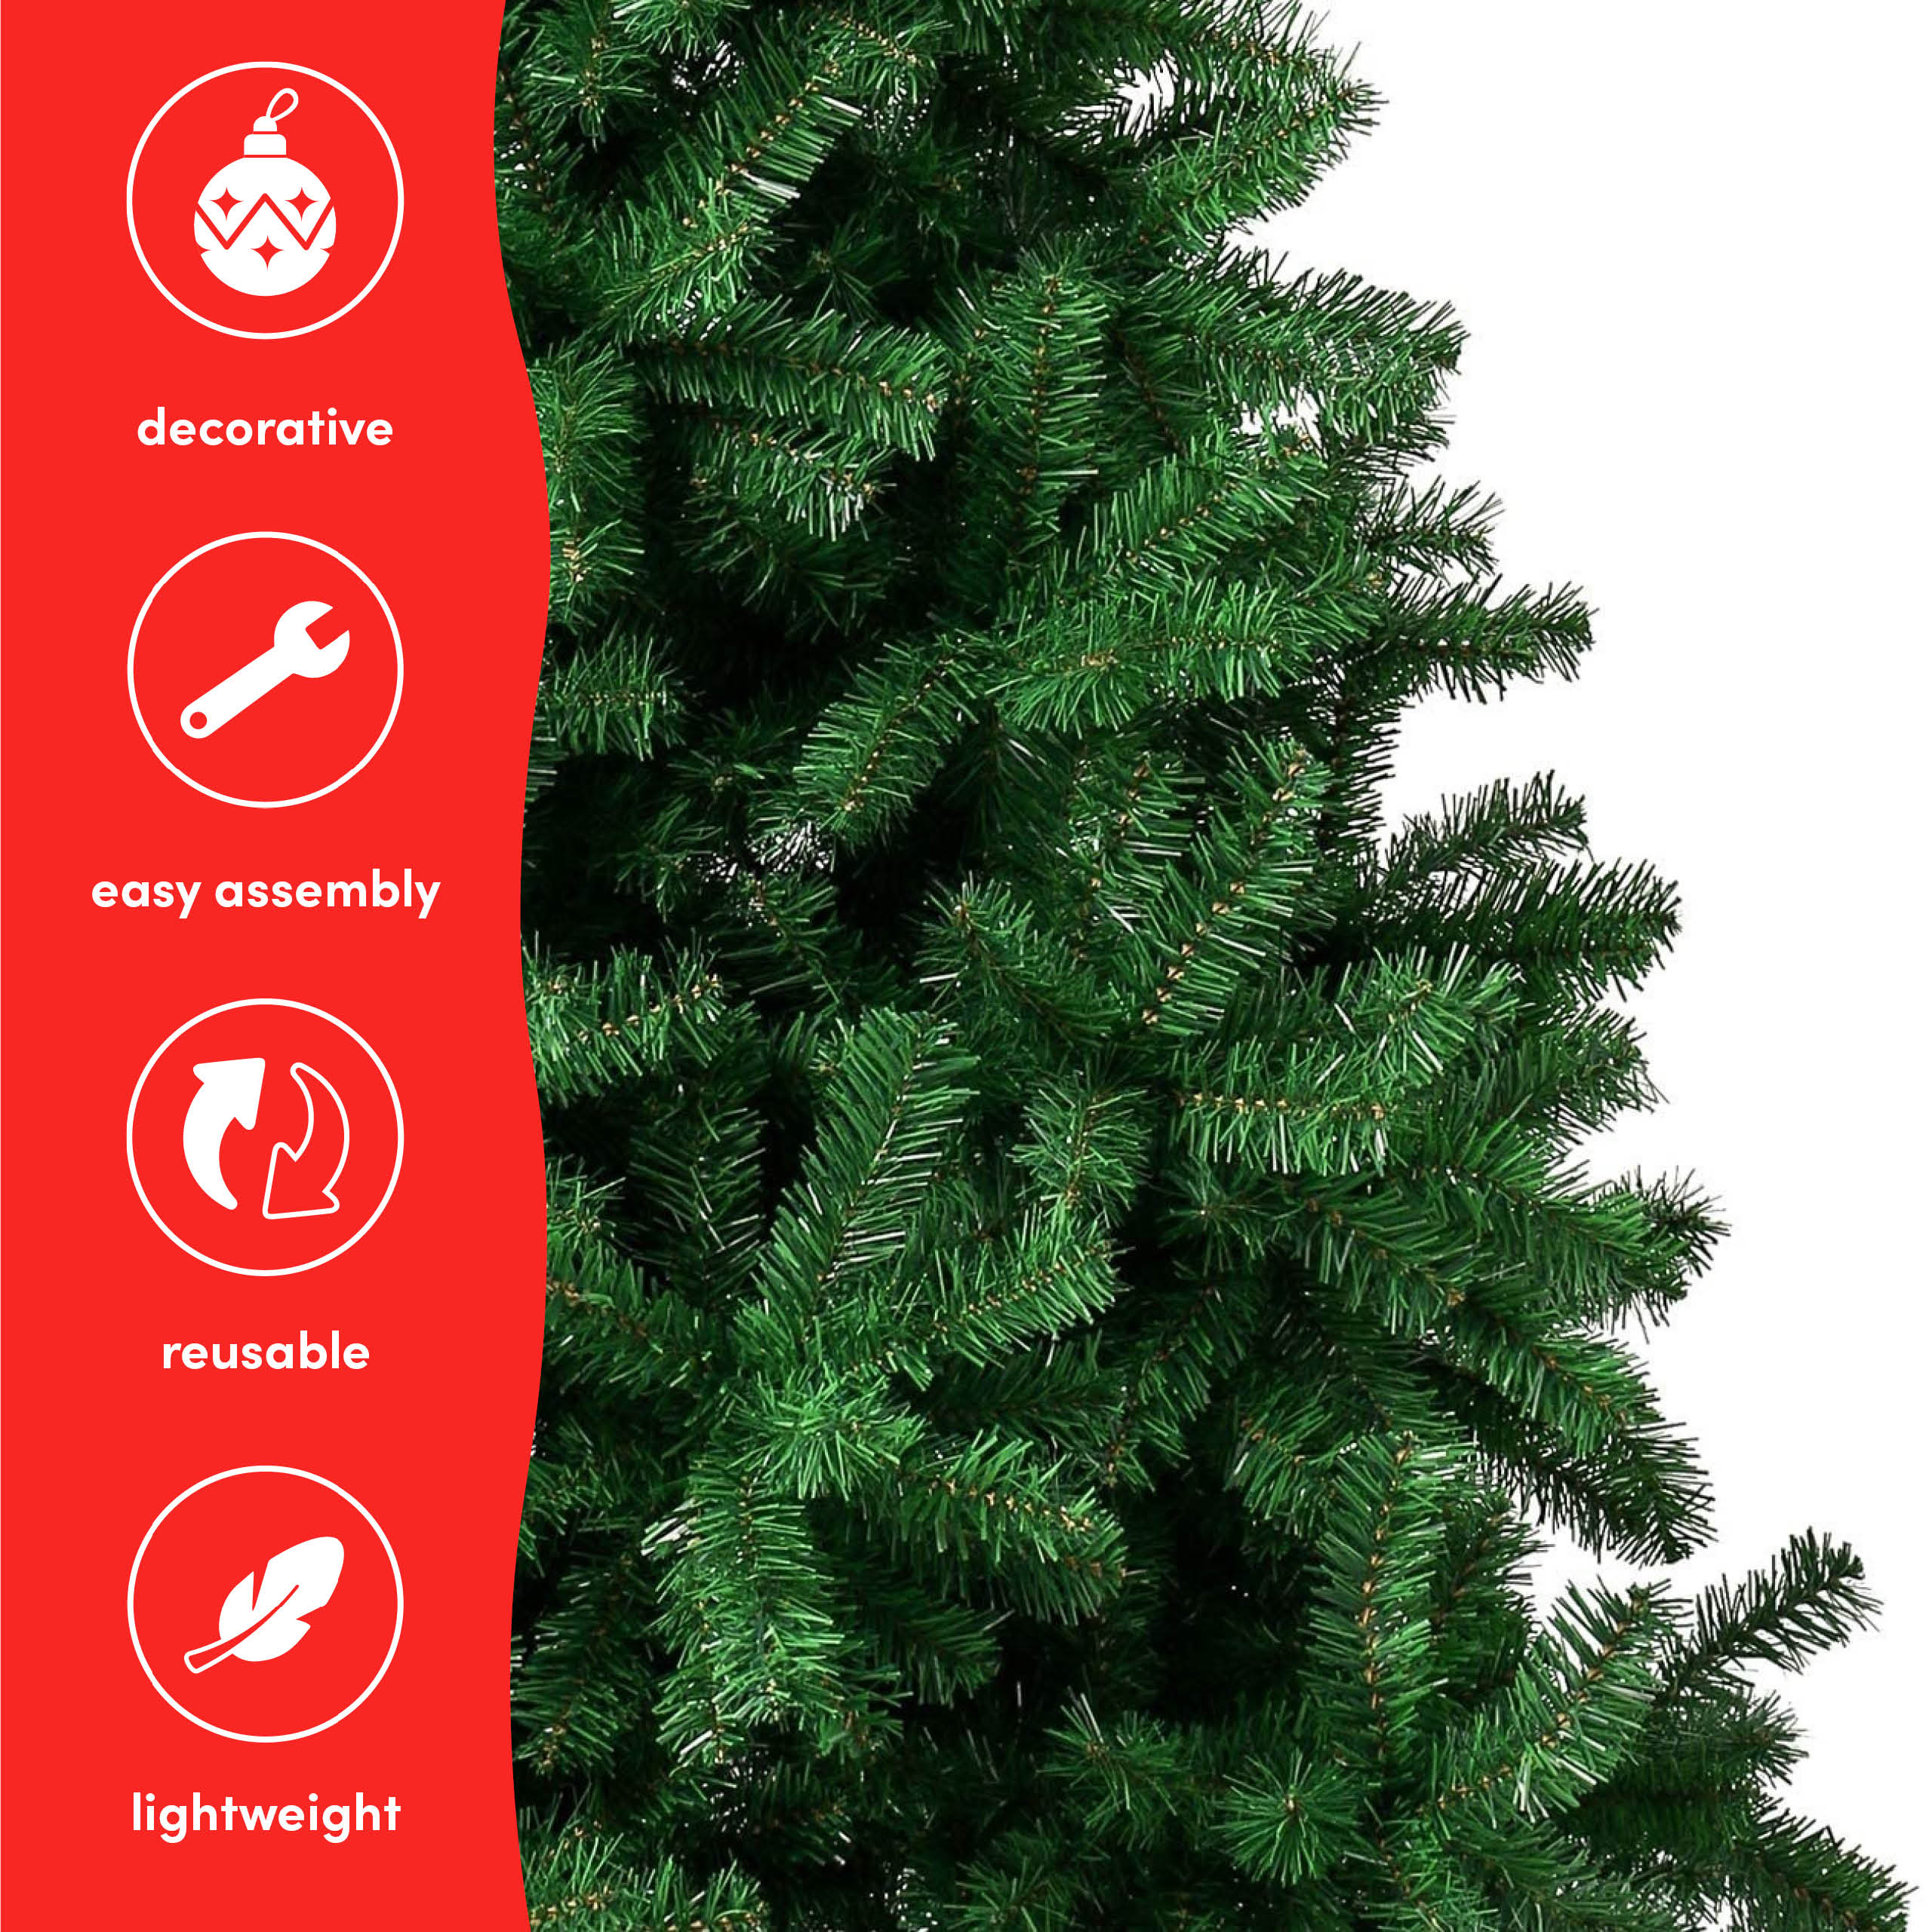 6FT Premium Artificial Christmas Tree with Metal Stand